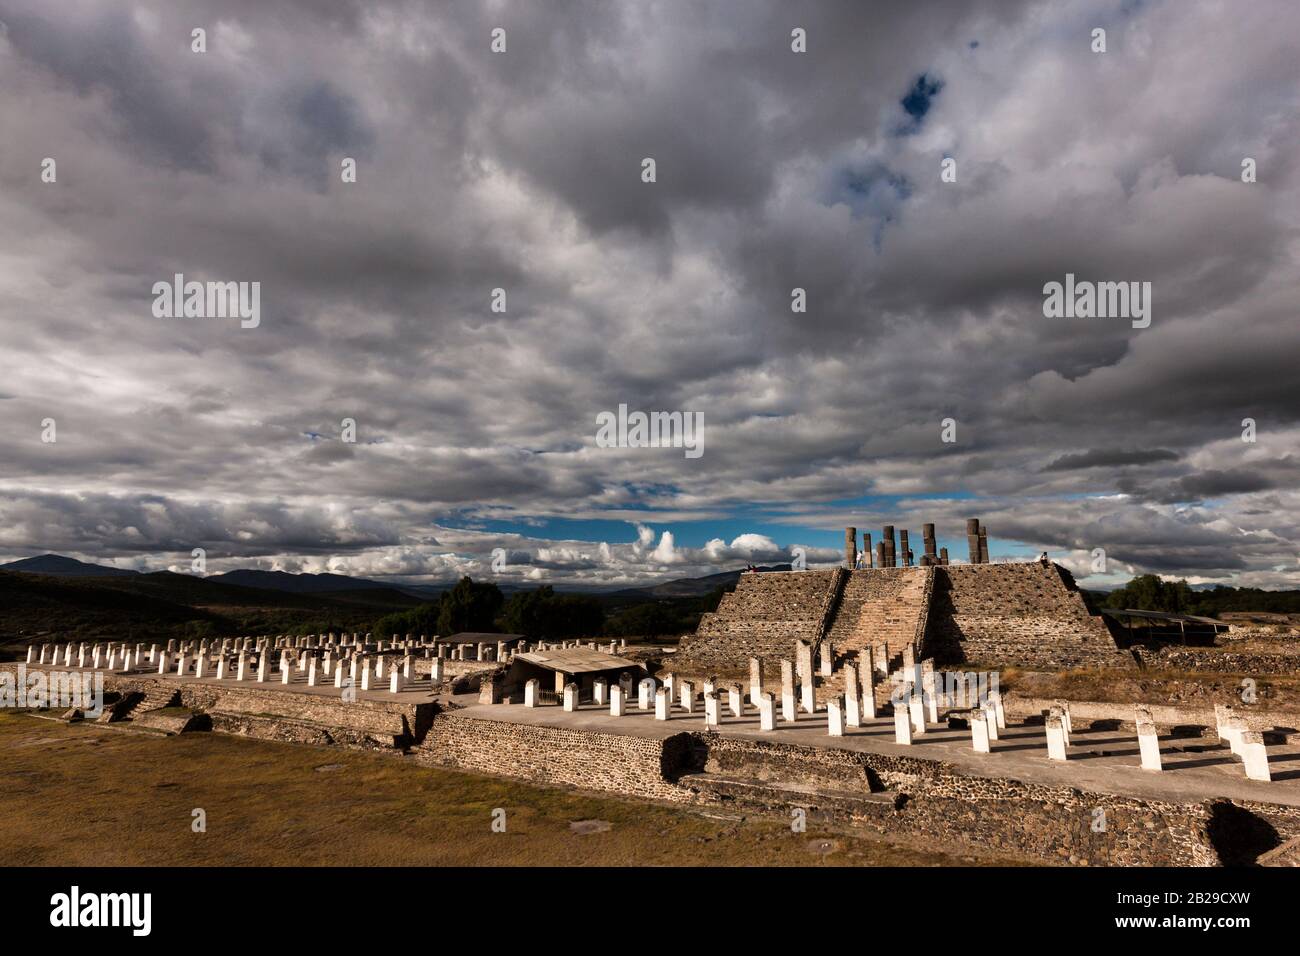 Pyramid of Quetzalcoatl, Tula archaeological site, Toltec archaeological site, state of Hidalgo, Mexico, Central America Stock Photo